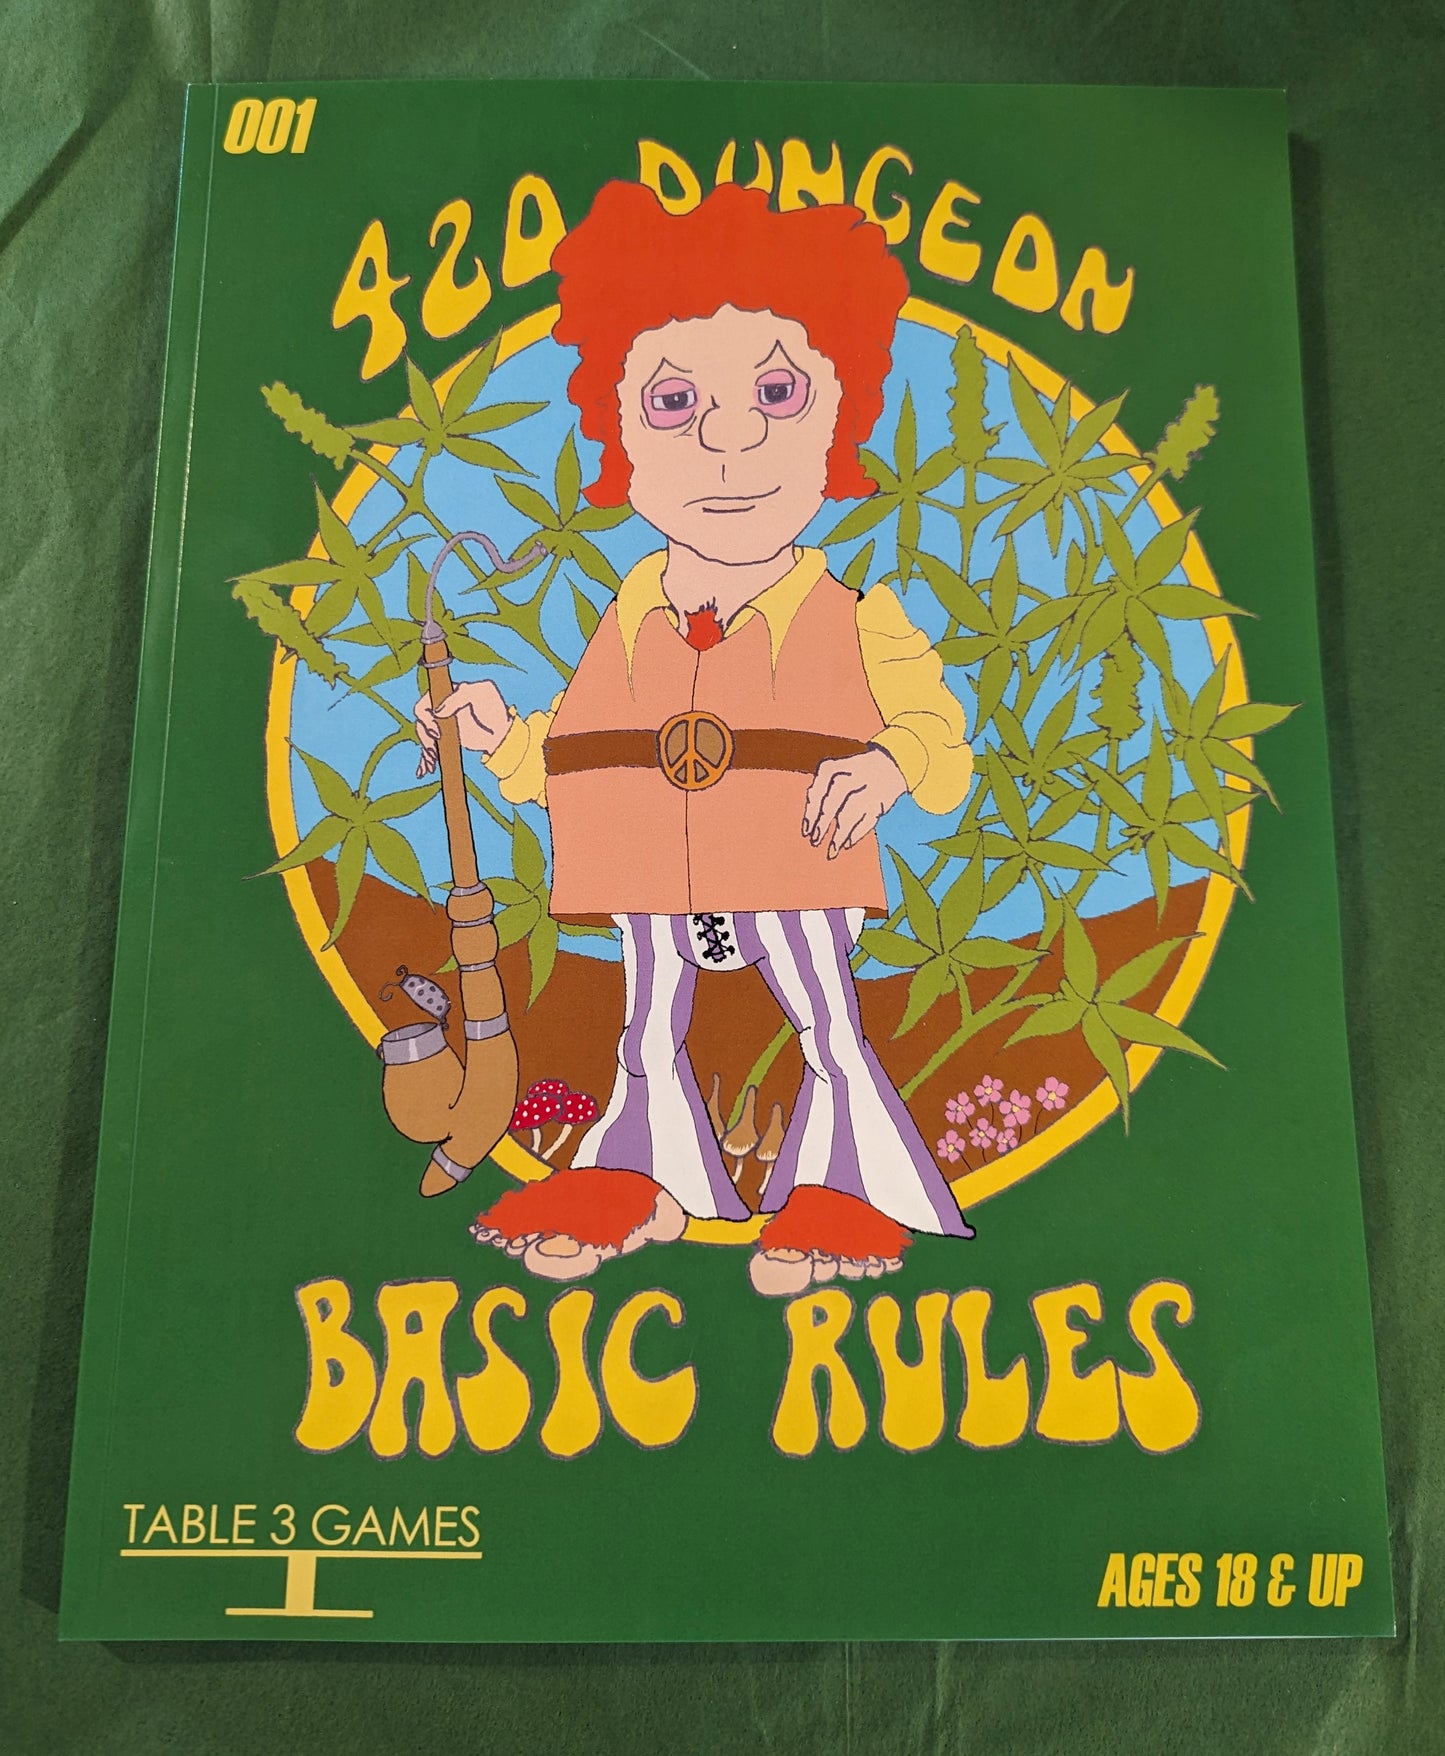 420 Dungeon Basic Rules Game